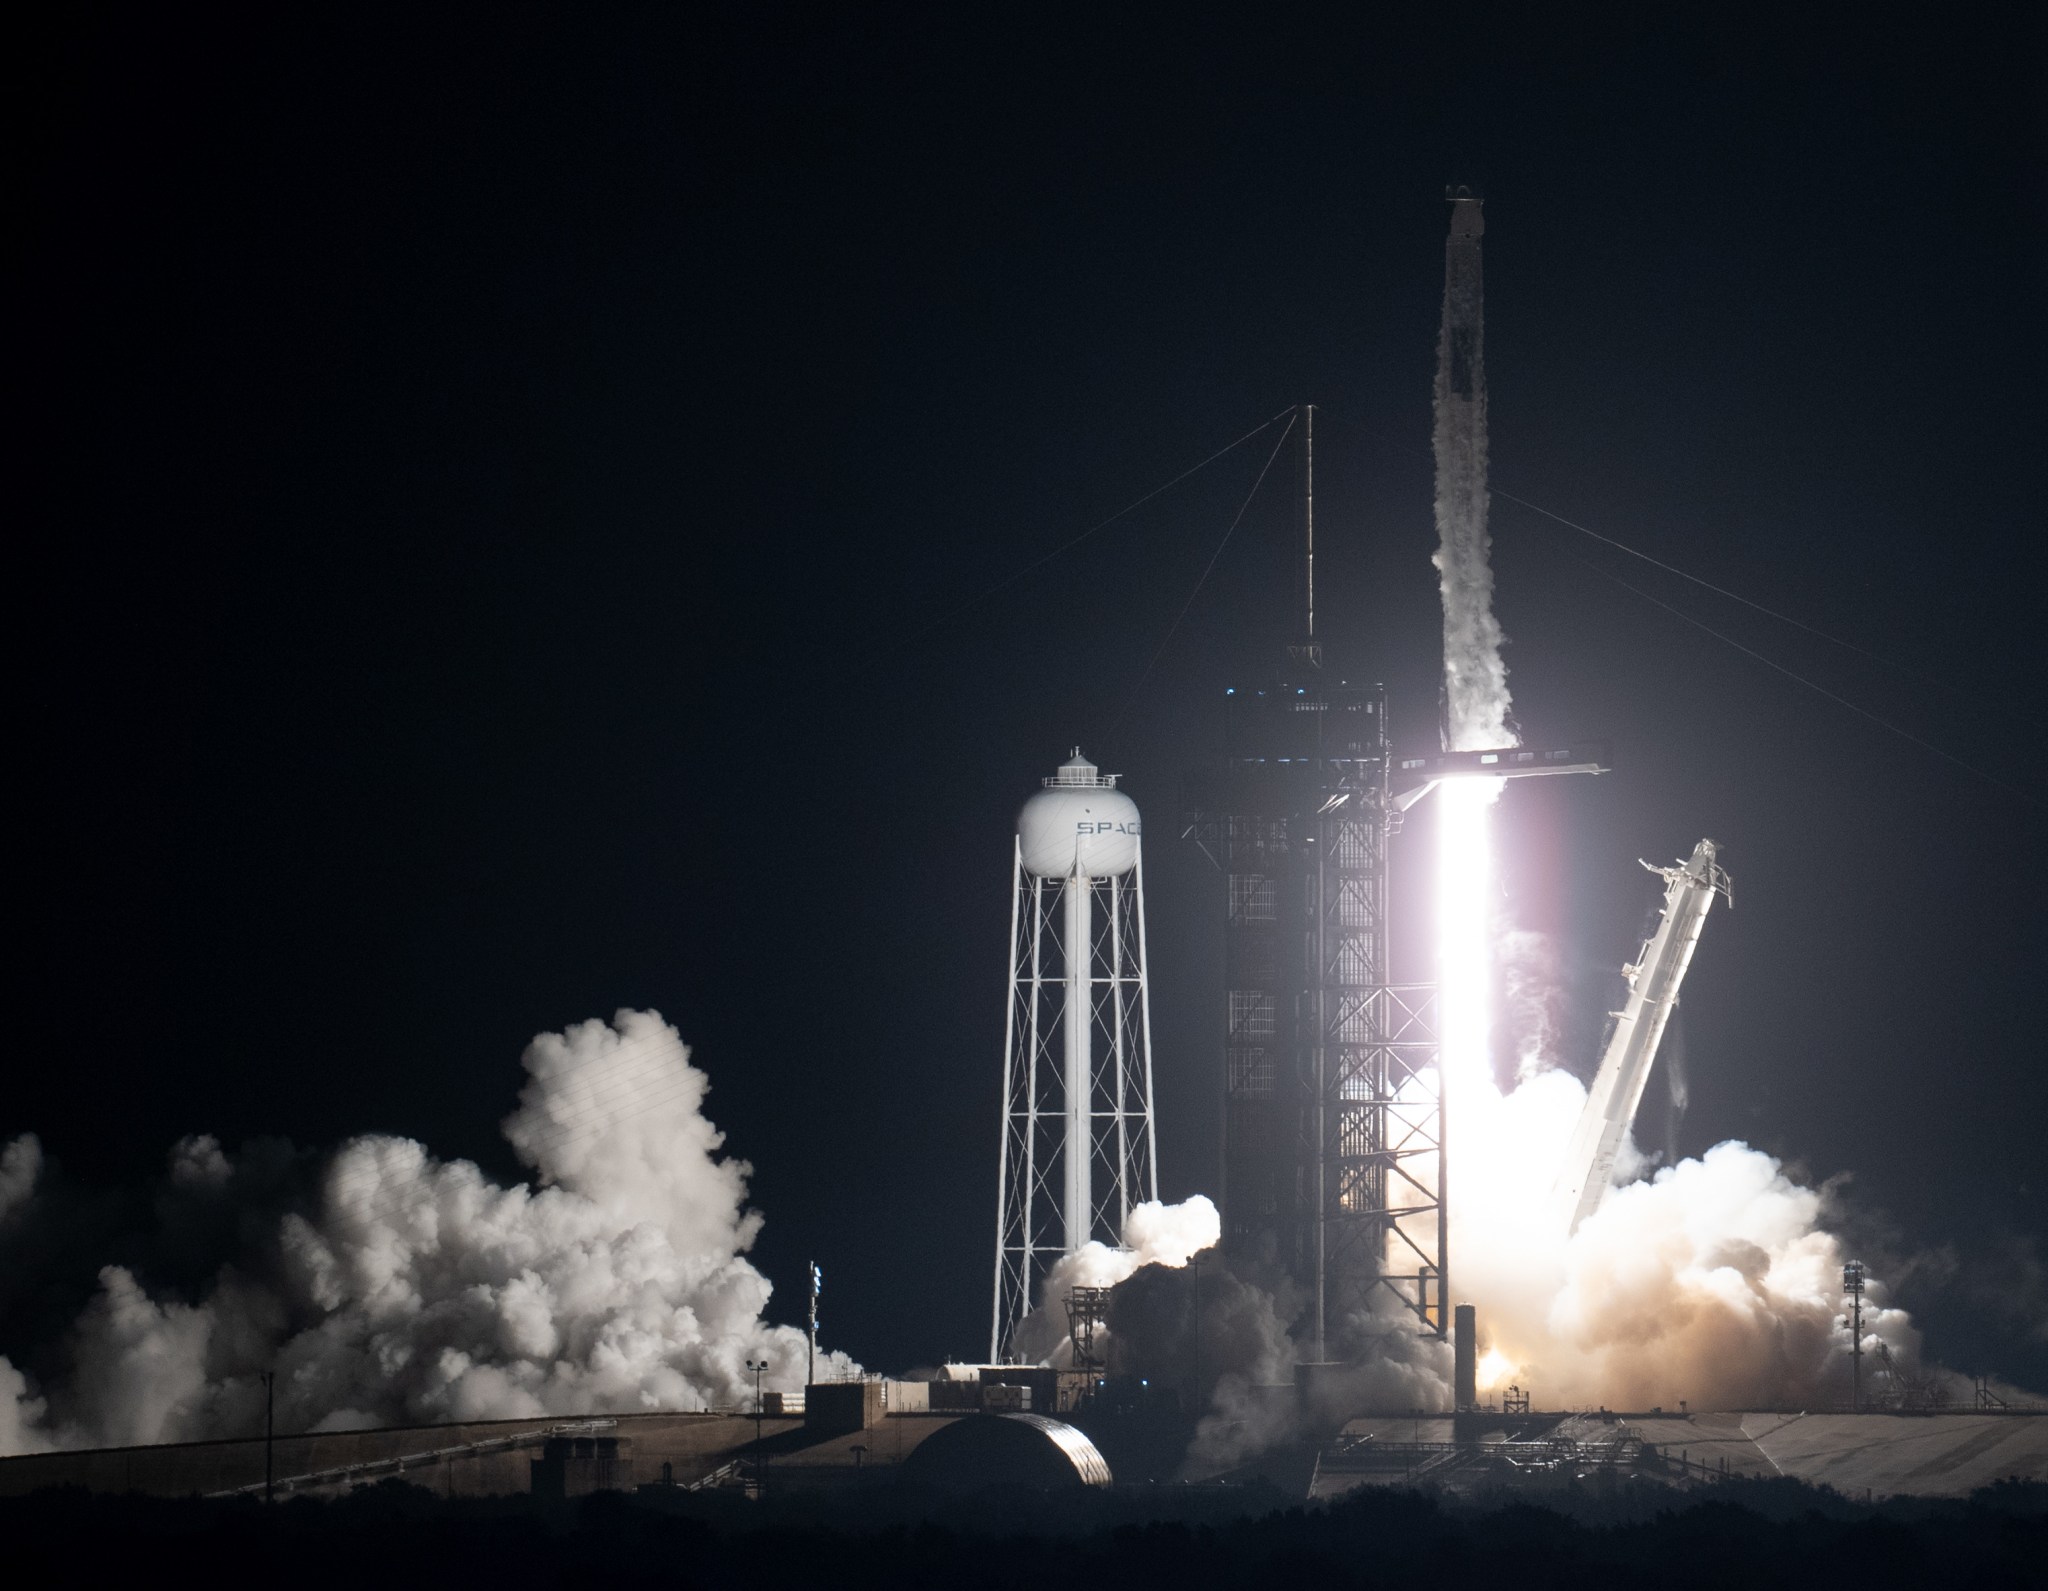 SpaceX Falcon 9 rocket liftoff